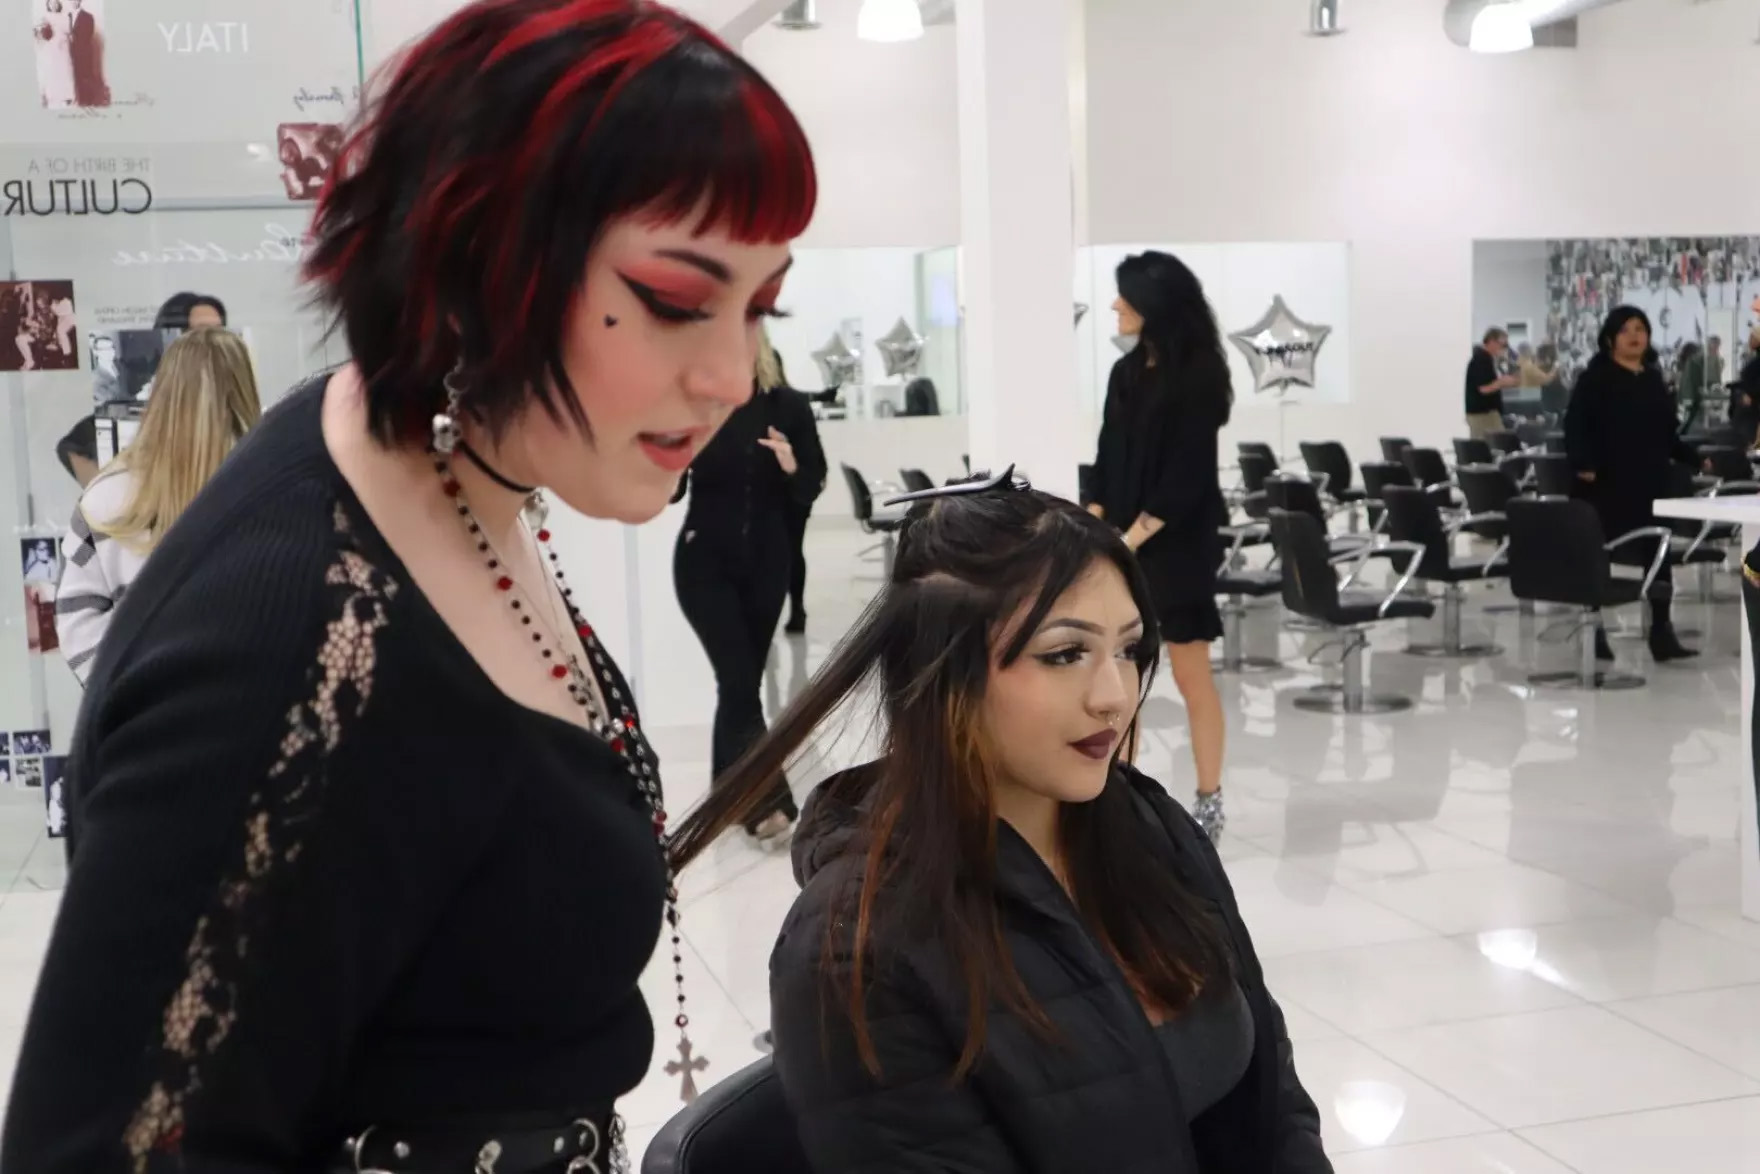 Two people are seen in a salon setting. One person is seated and covered with a chair cloth while a cosmetology student prepares tinsel for her hair in the foreground.